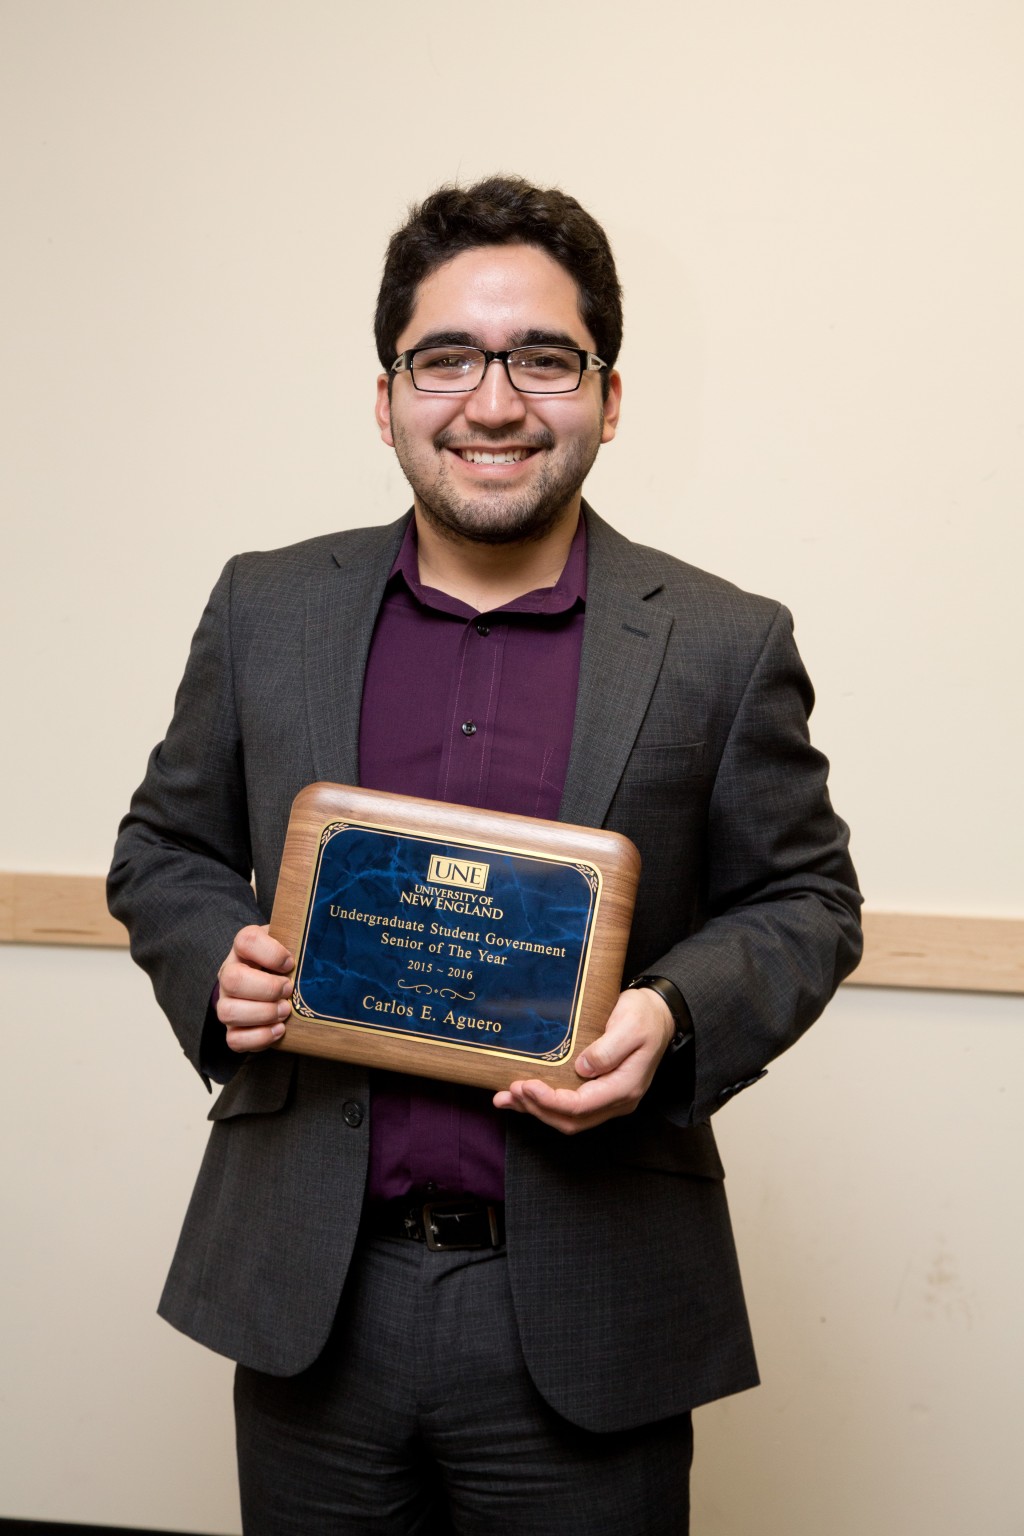 Carlos Aguero received the Undergraduate Student Government Senior of the Year Award at UNE's ULEAD Awards Ceremony, held April 